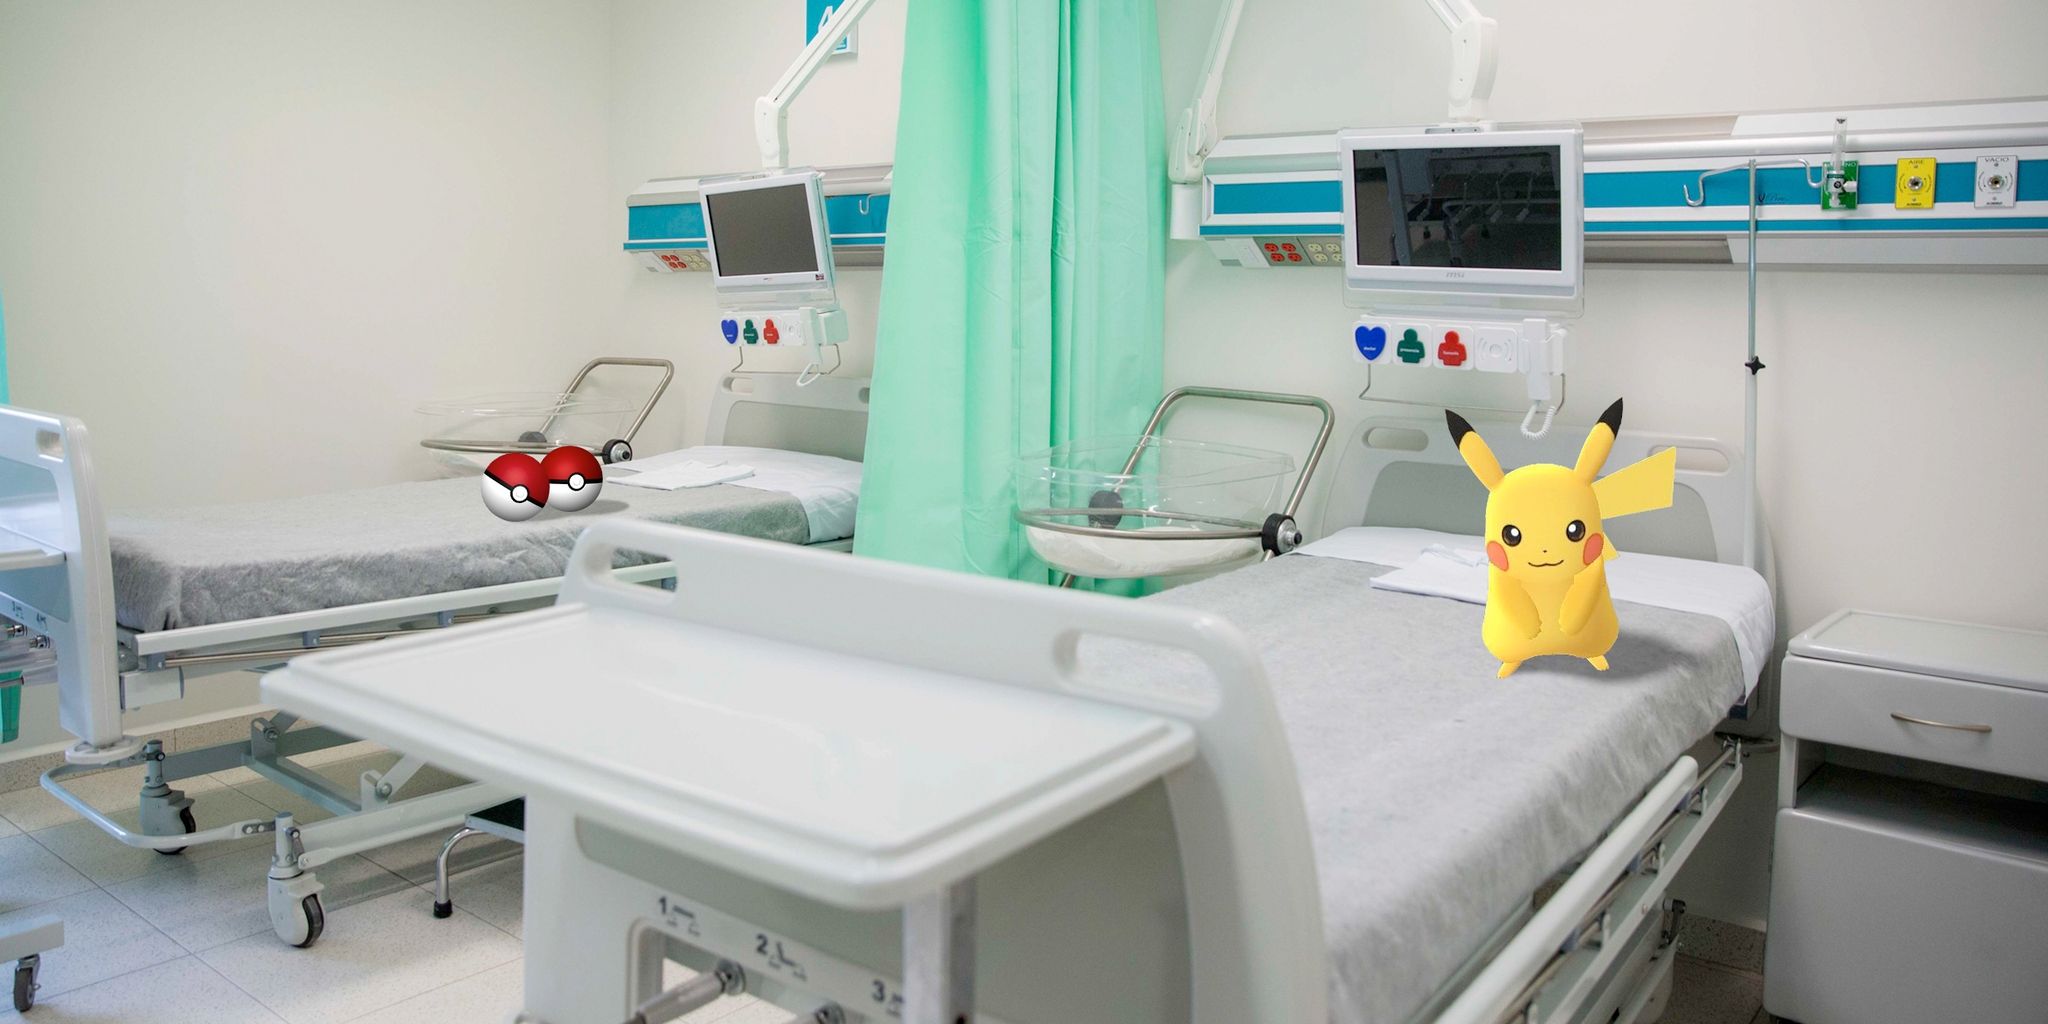 10 Reasons Pikachu Is Literally The WORST Pokémon (And 5 Reasons He’s Still Killer)